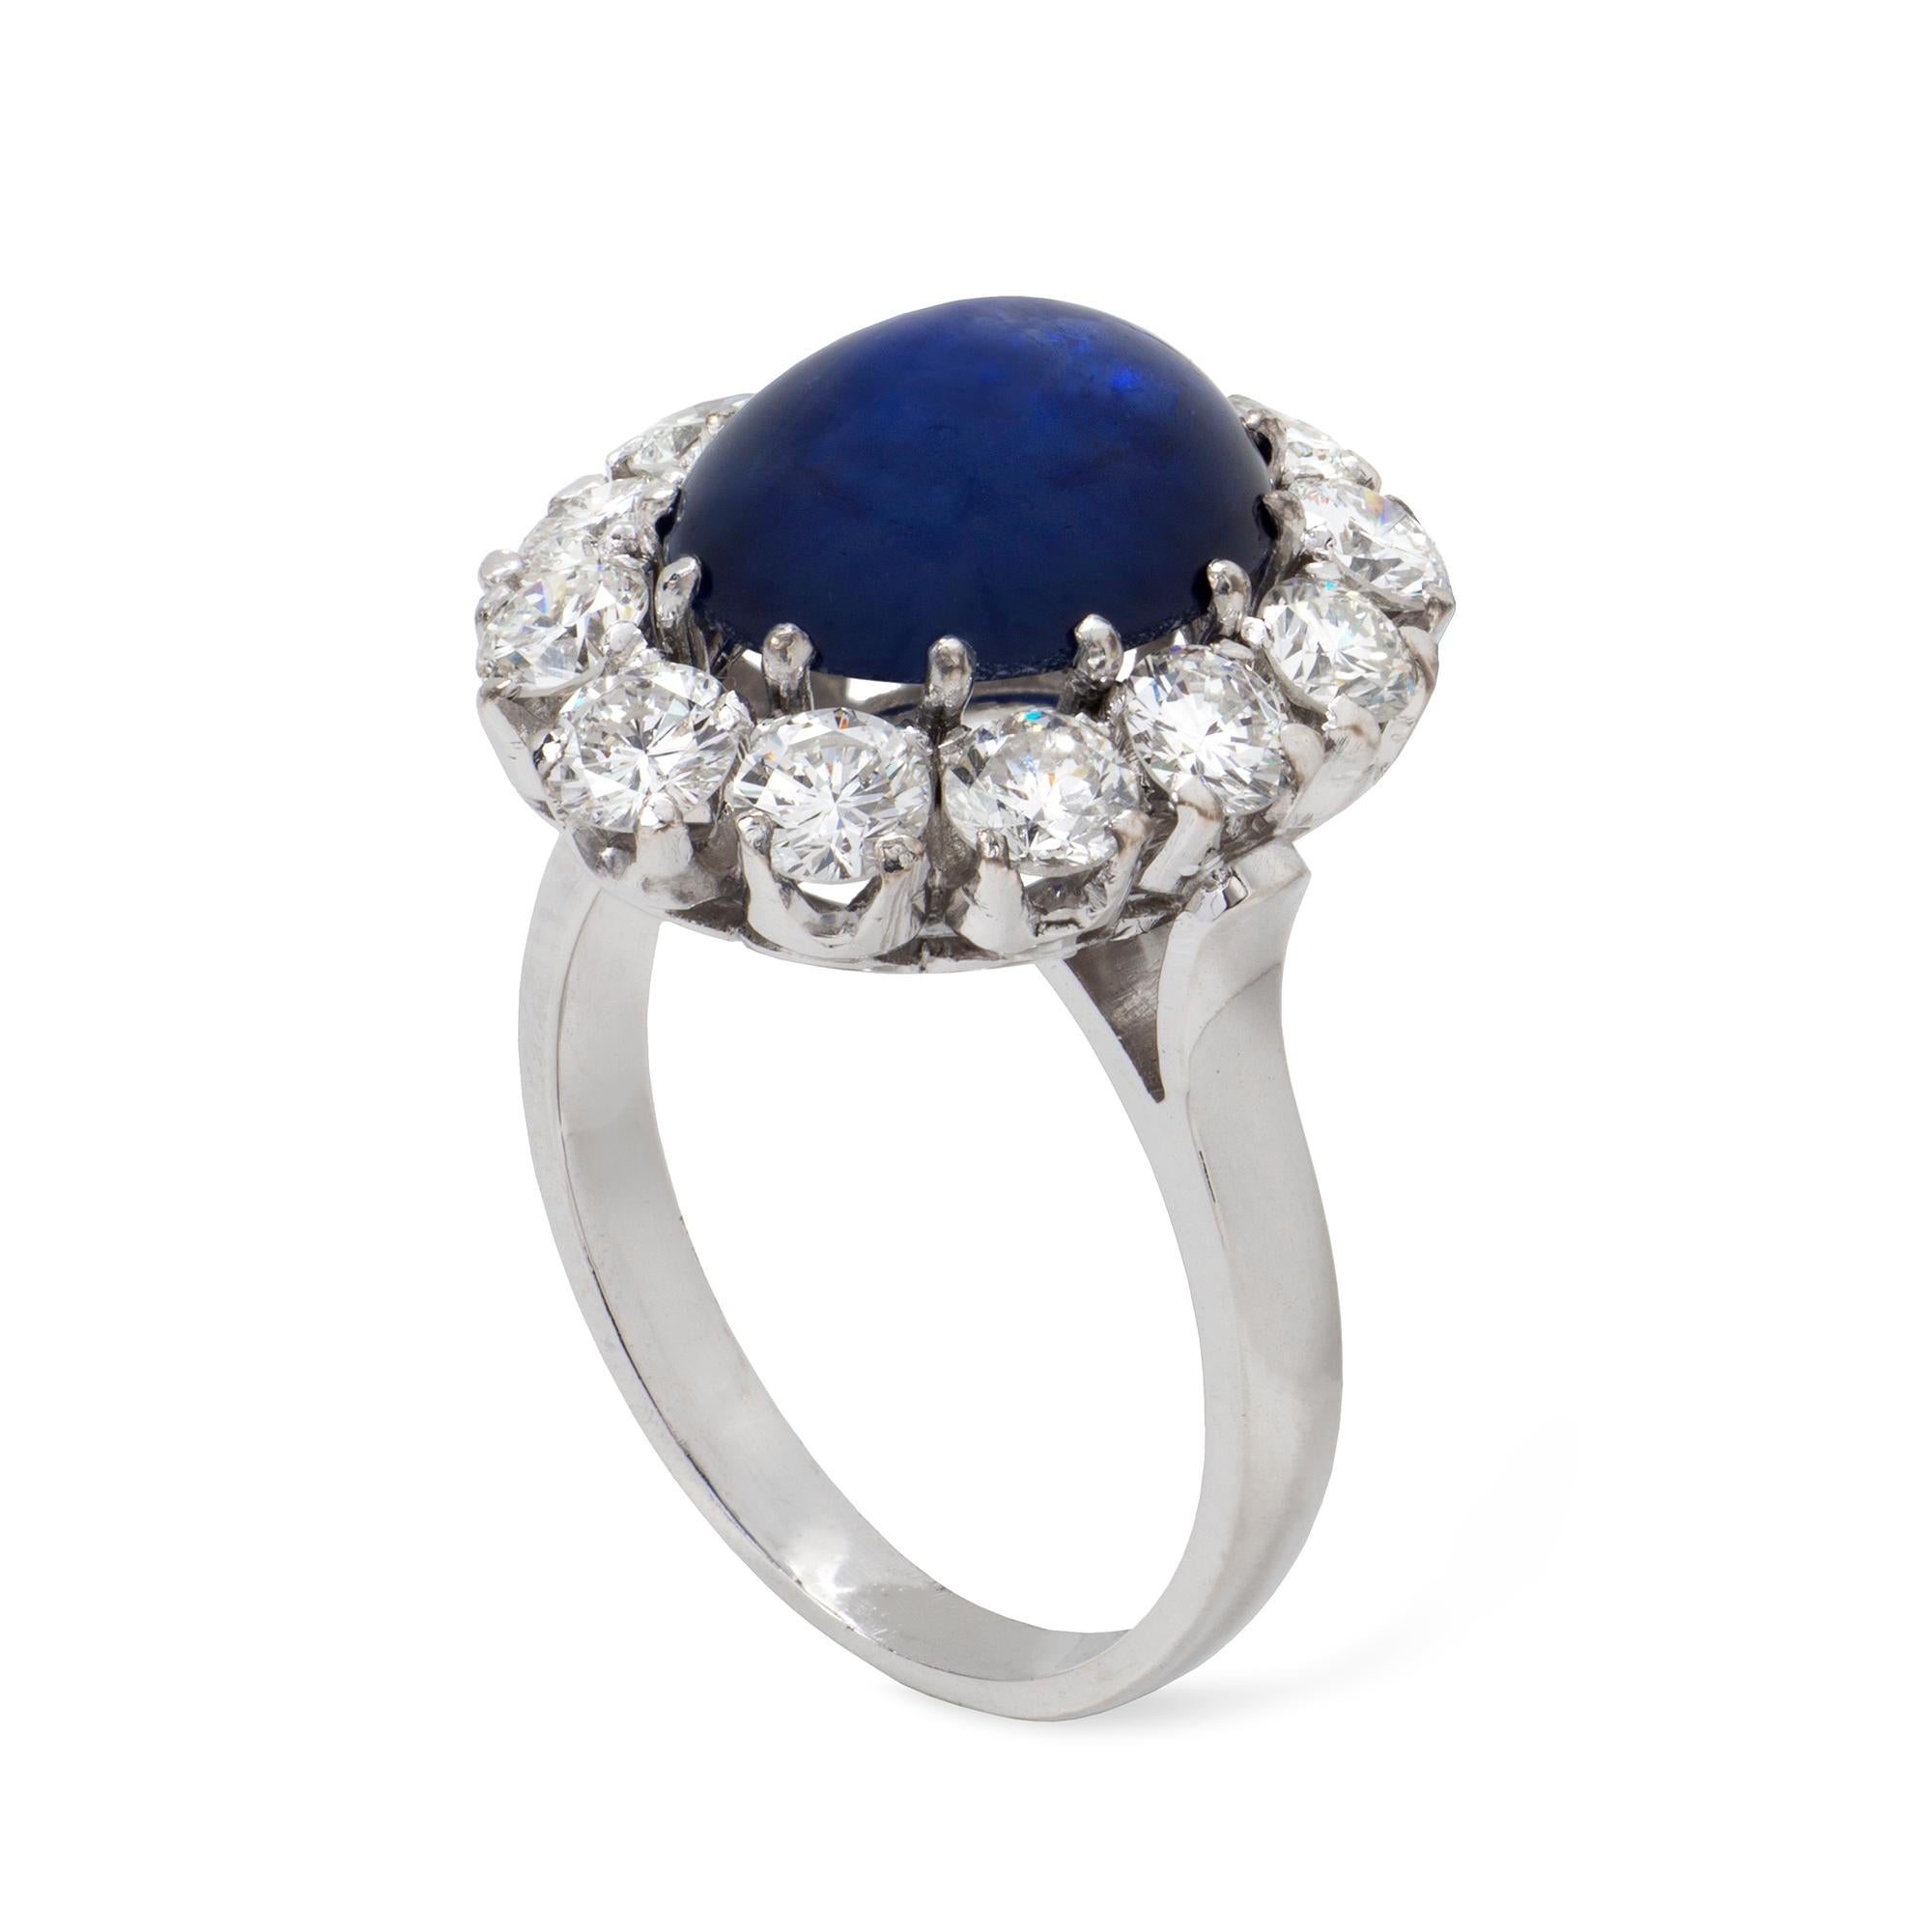 A cabochon sapphire and diamond cluster ring, the oval cabochon sapphire weighing 5.11 carats, surrounded by twelve round brilliant-cut diamonds estimated to weigh 2 carats in total, all claw-set in white gold mount, later-hallmarked 18ct London,